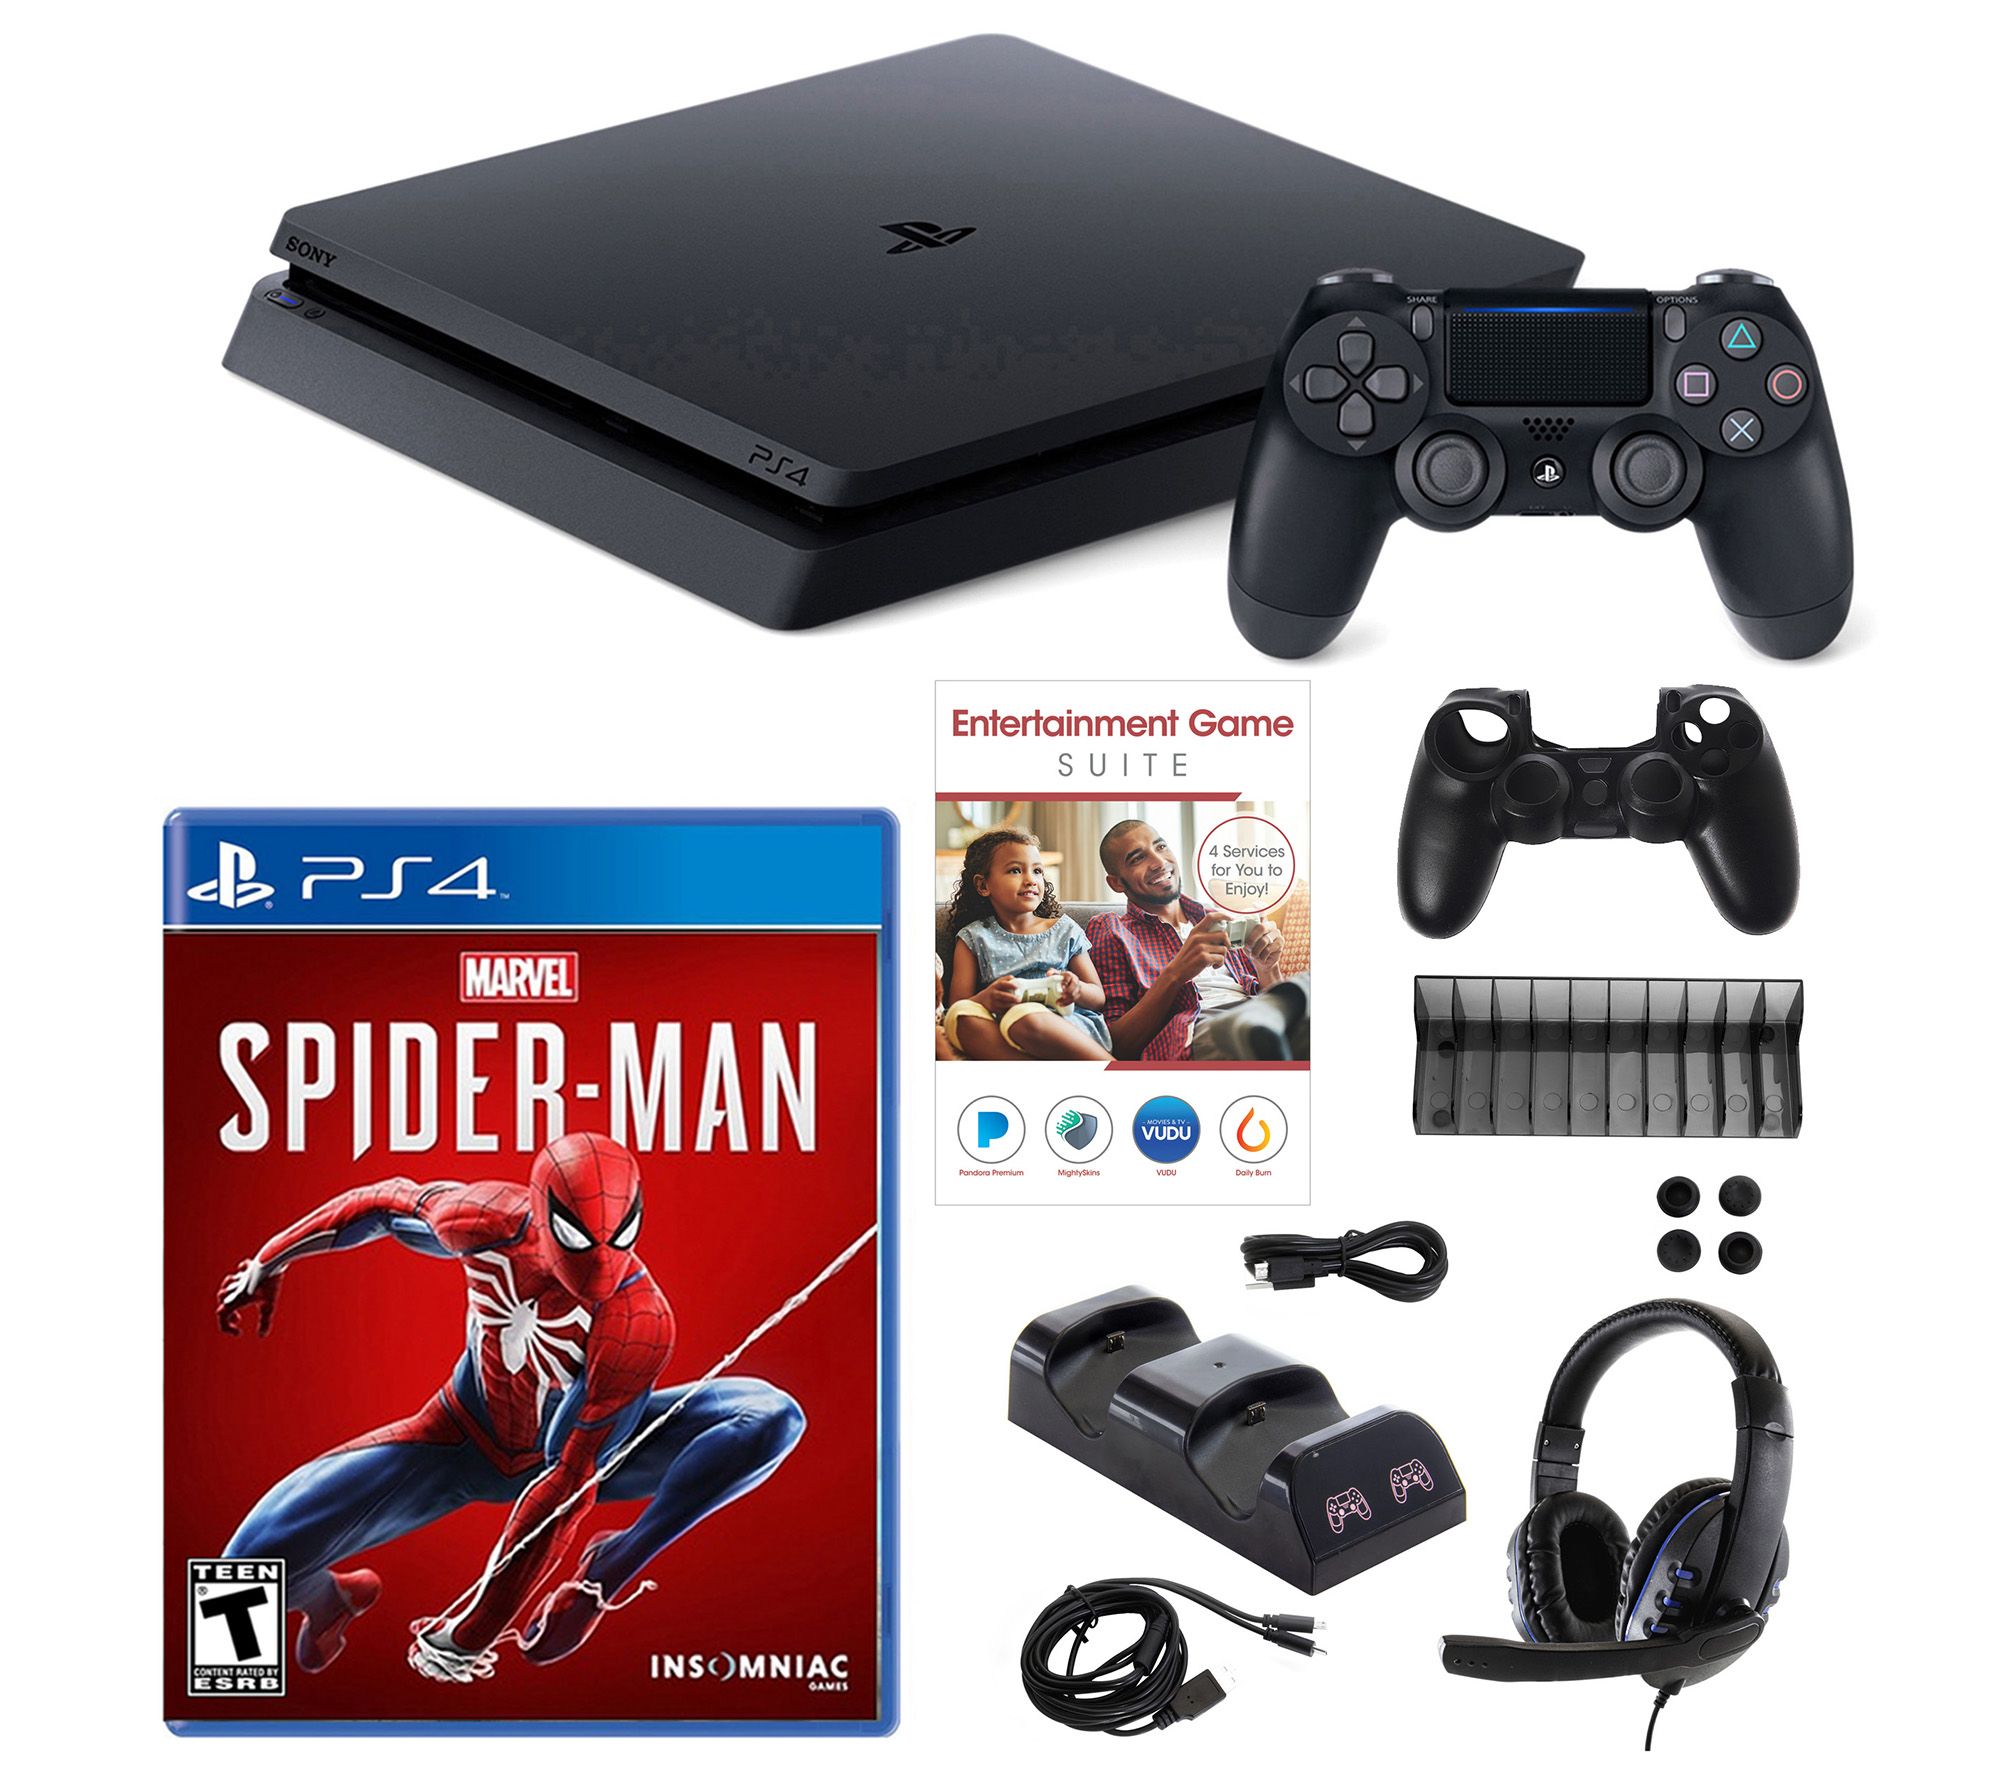 buy now pay later games consoles